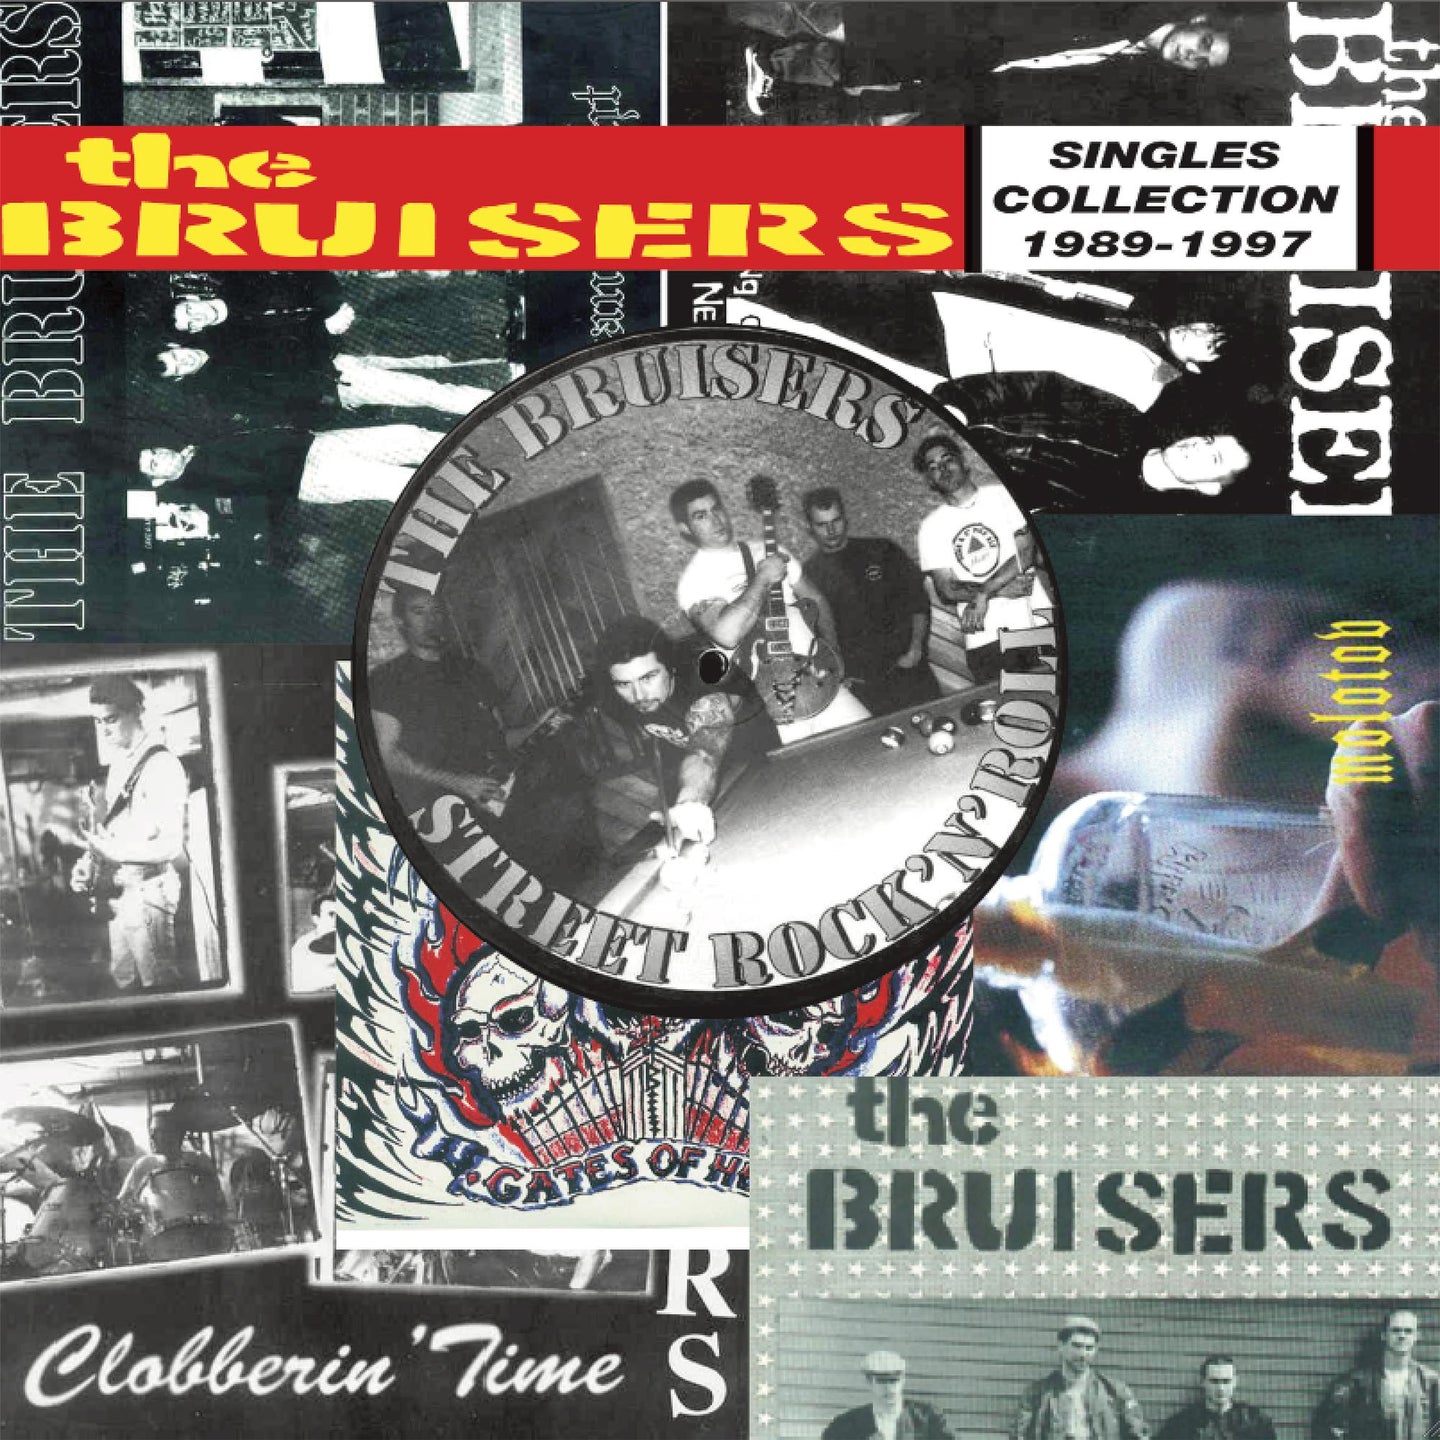 Bruisers Singles Collection 1989-1997